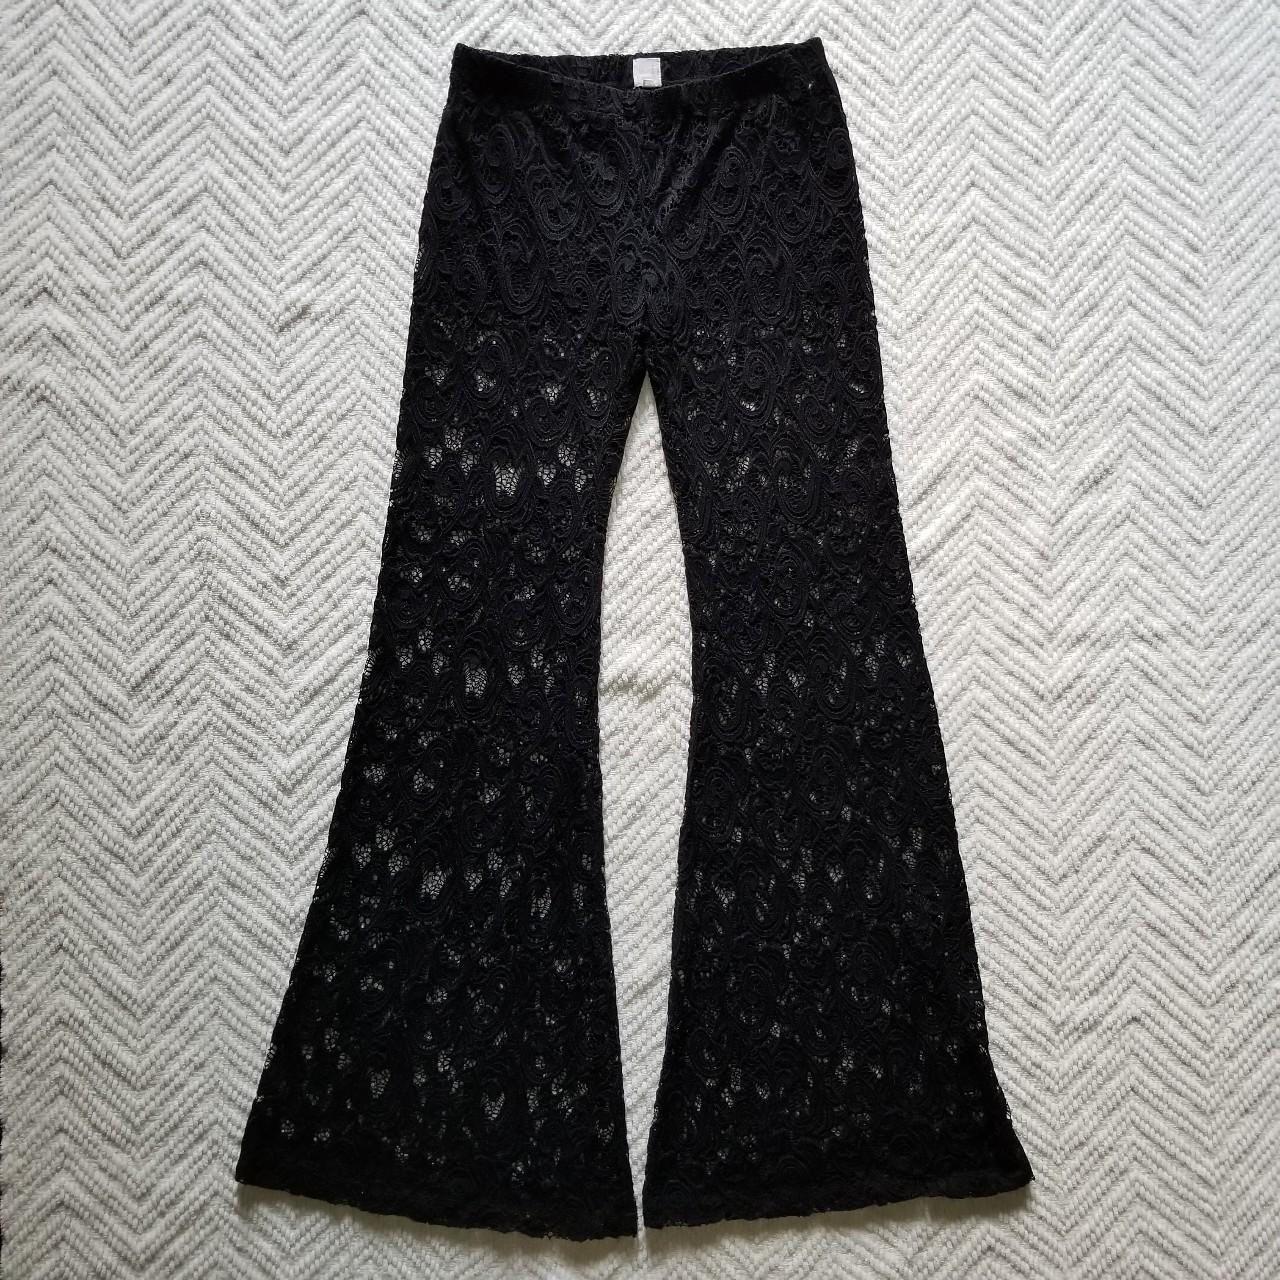 Product Image 1 - See through lace overlay flares